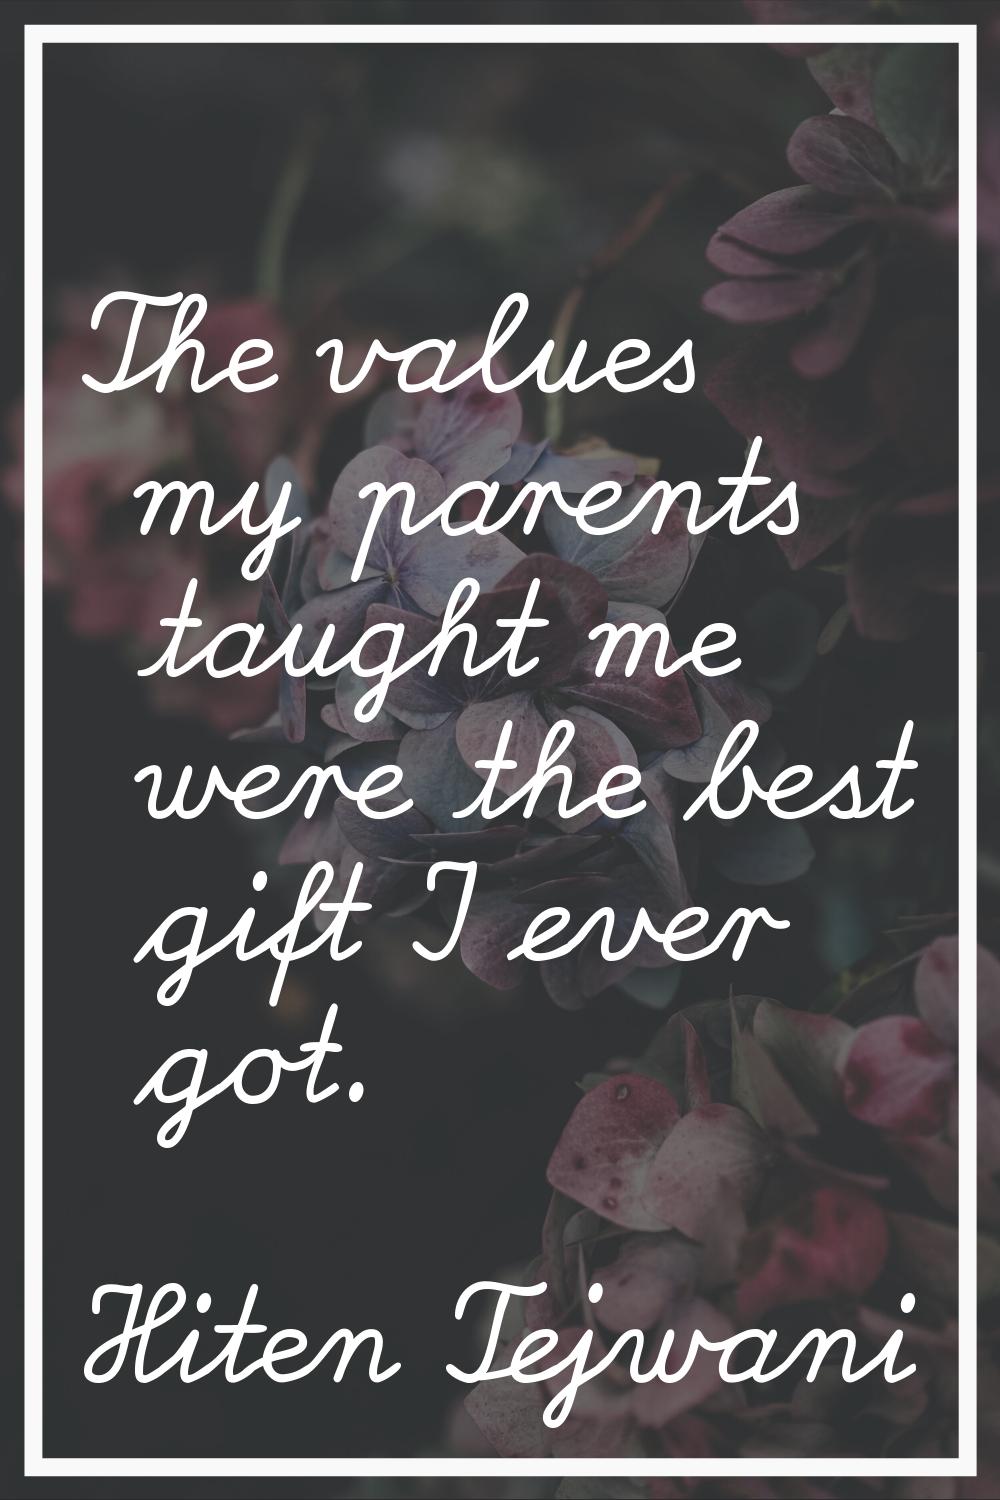 The values my parents taught me were the best gift I ever got.